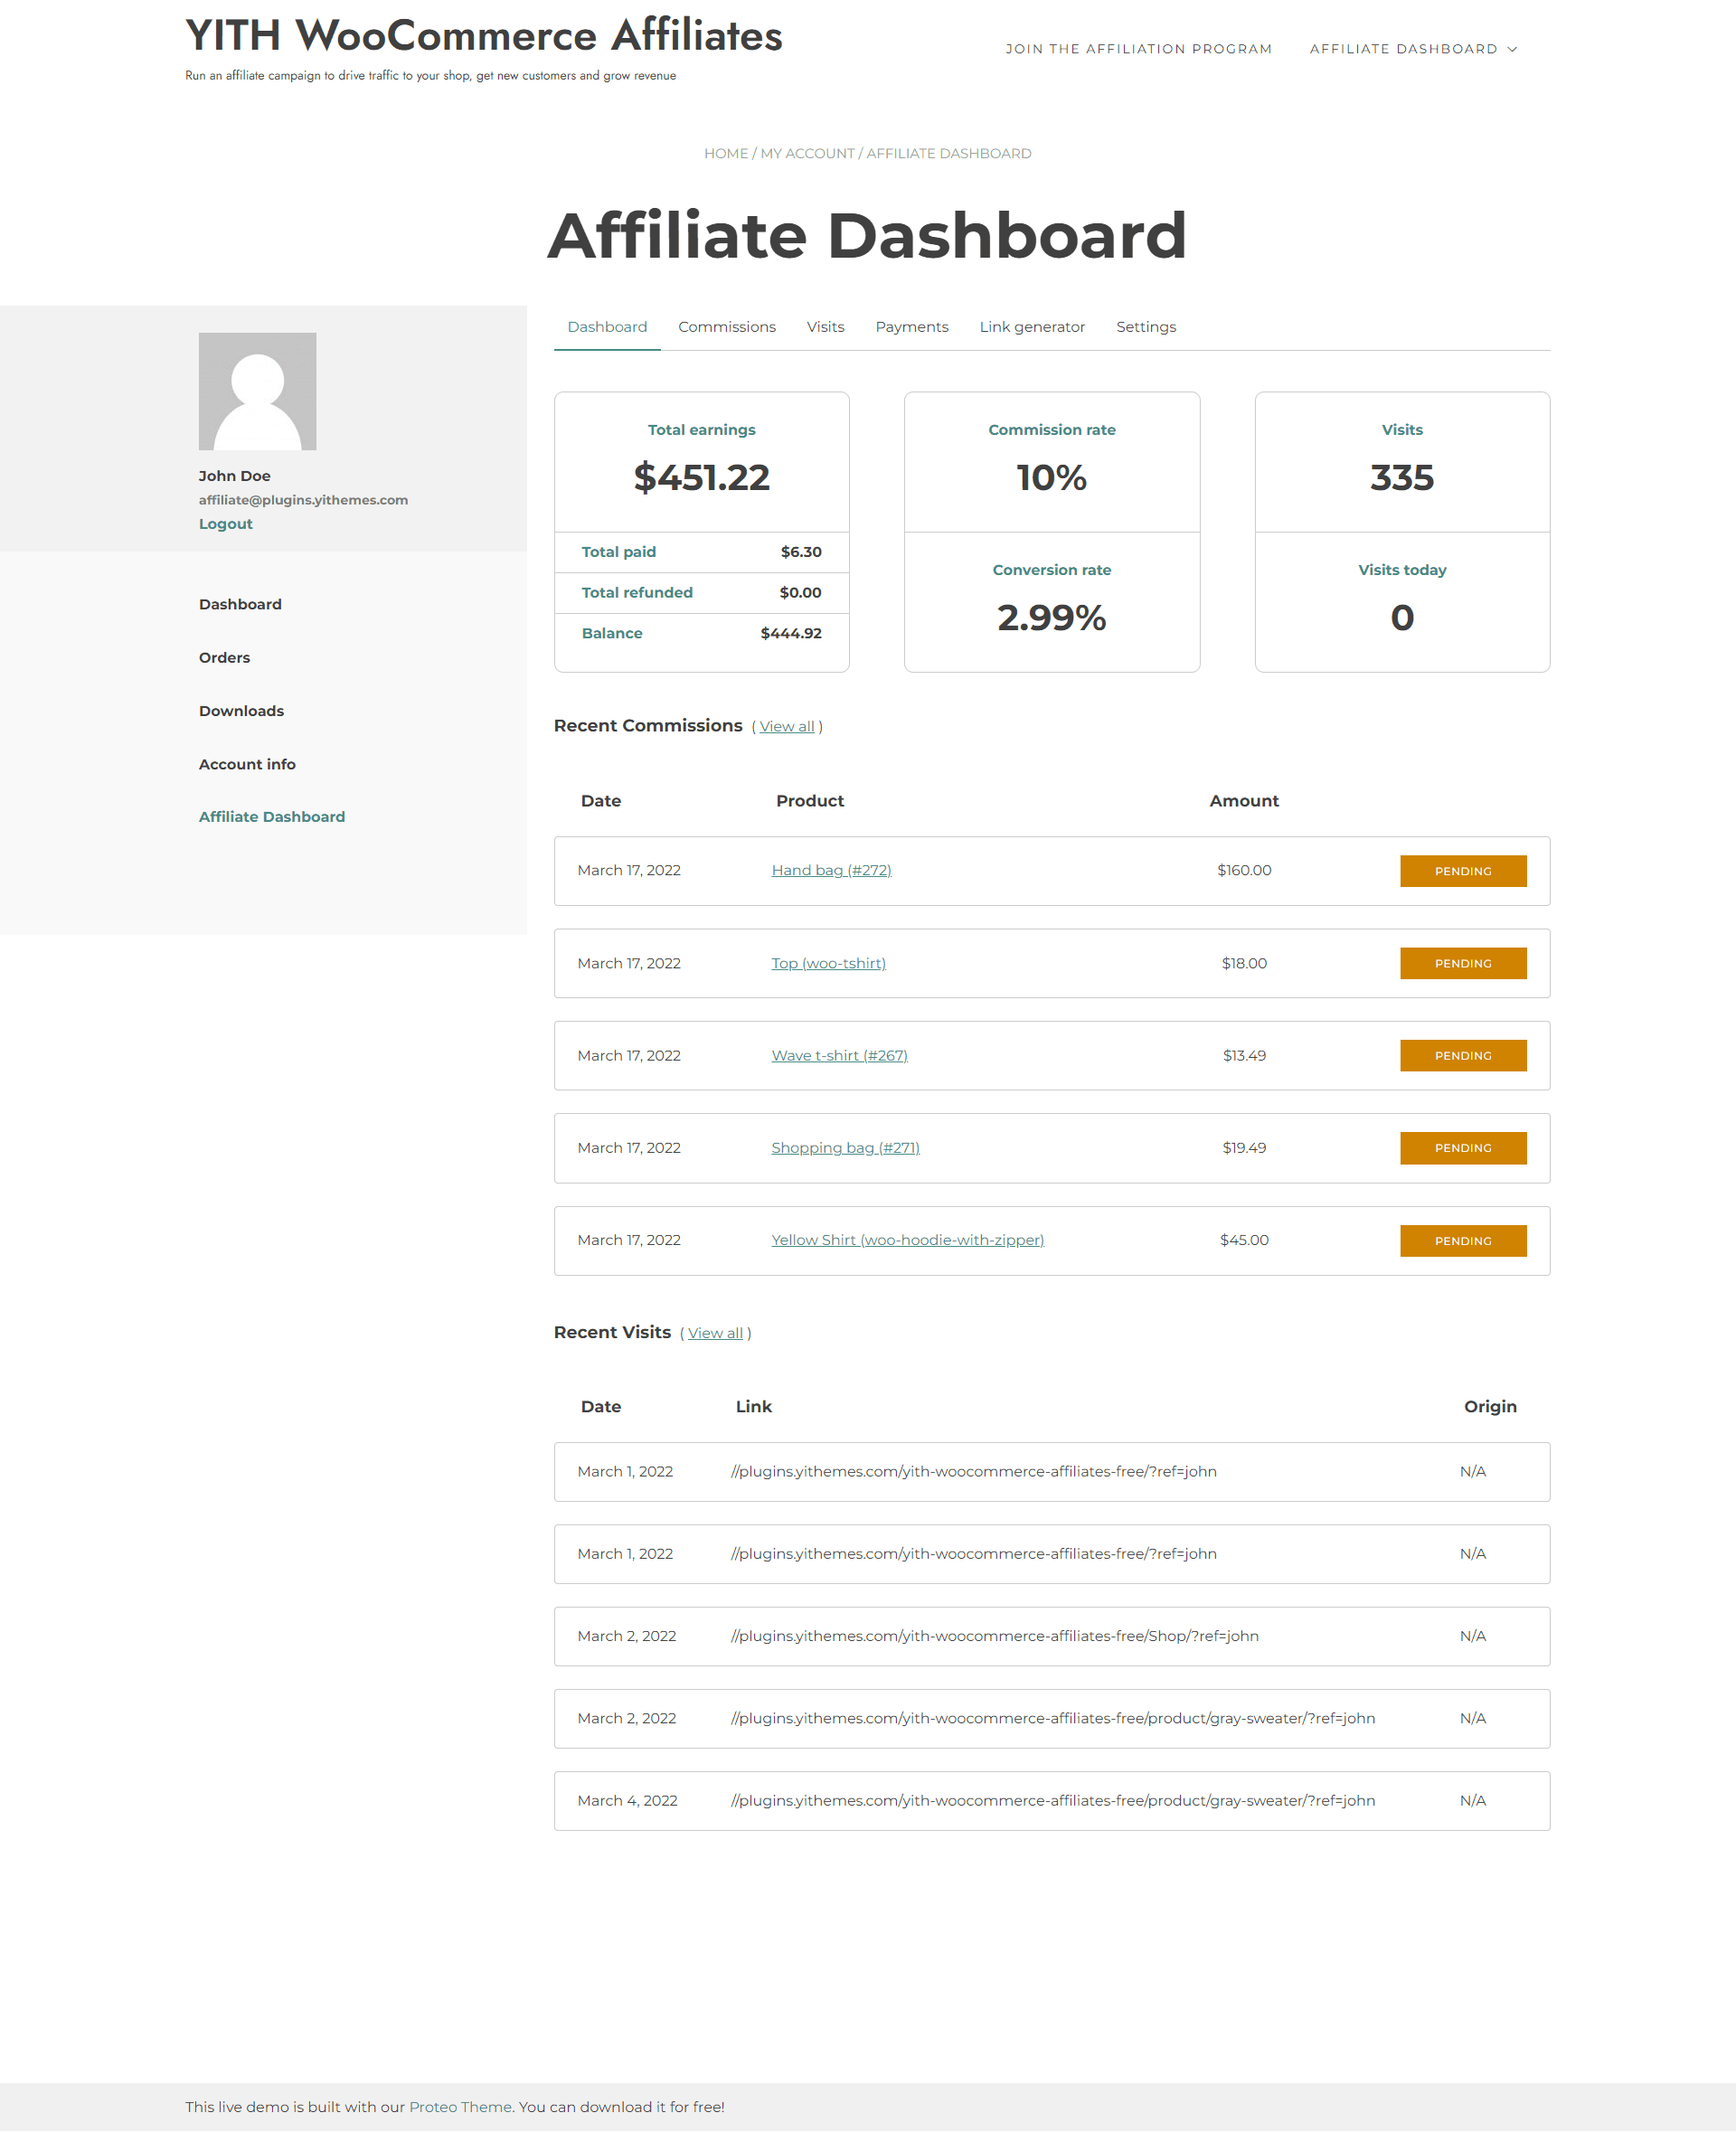 YITH dashboard for affiliates